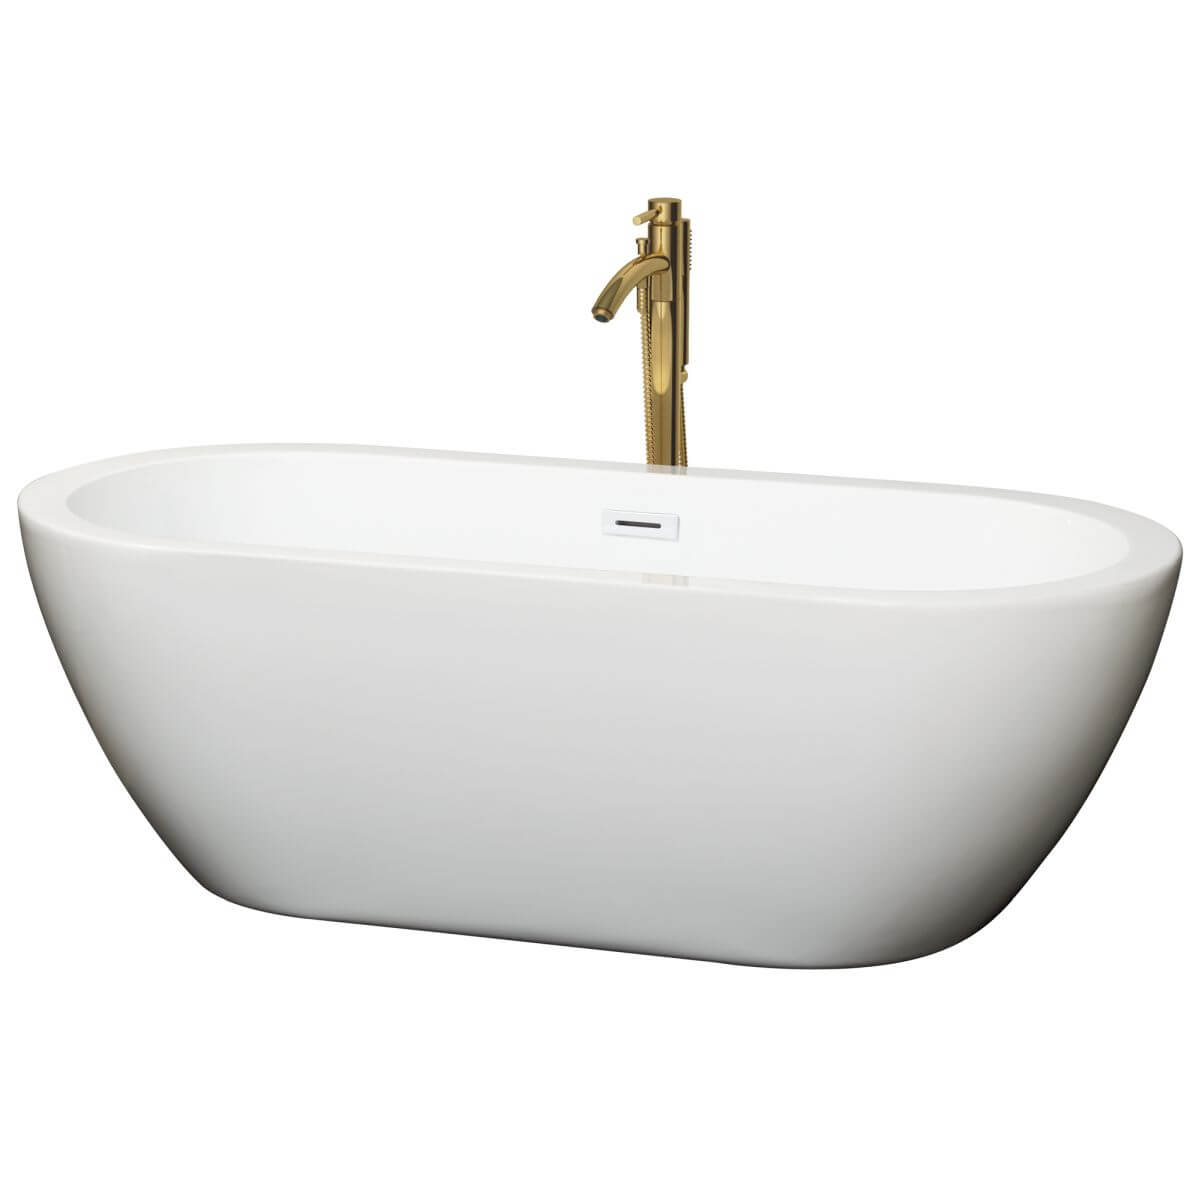 Wyndham Collection Soho 68 inch Freestanding Bathtub in White with Shiny White Trim and Floor Mounted Faucet in Brushed Gold - WCOBT100268SWATPGD